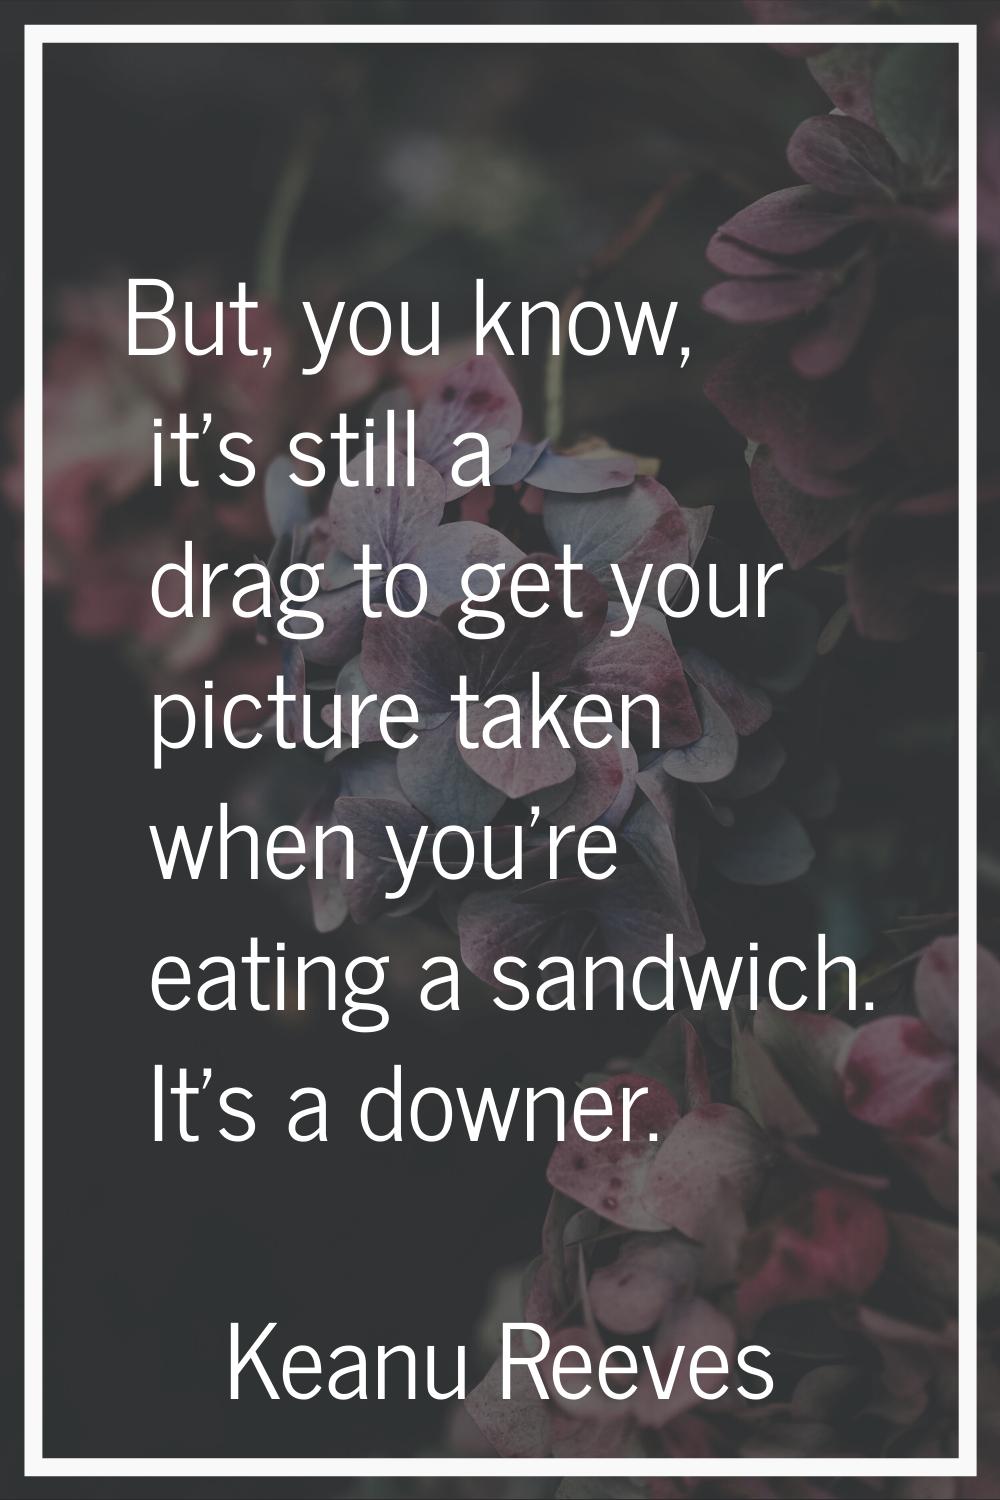 But, you know, it's still a drag to get your picture taken when you're eating a sandwich. It's a do